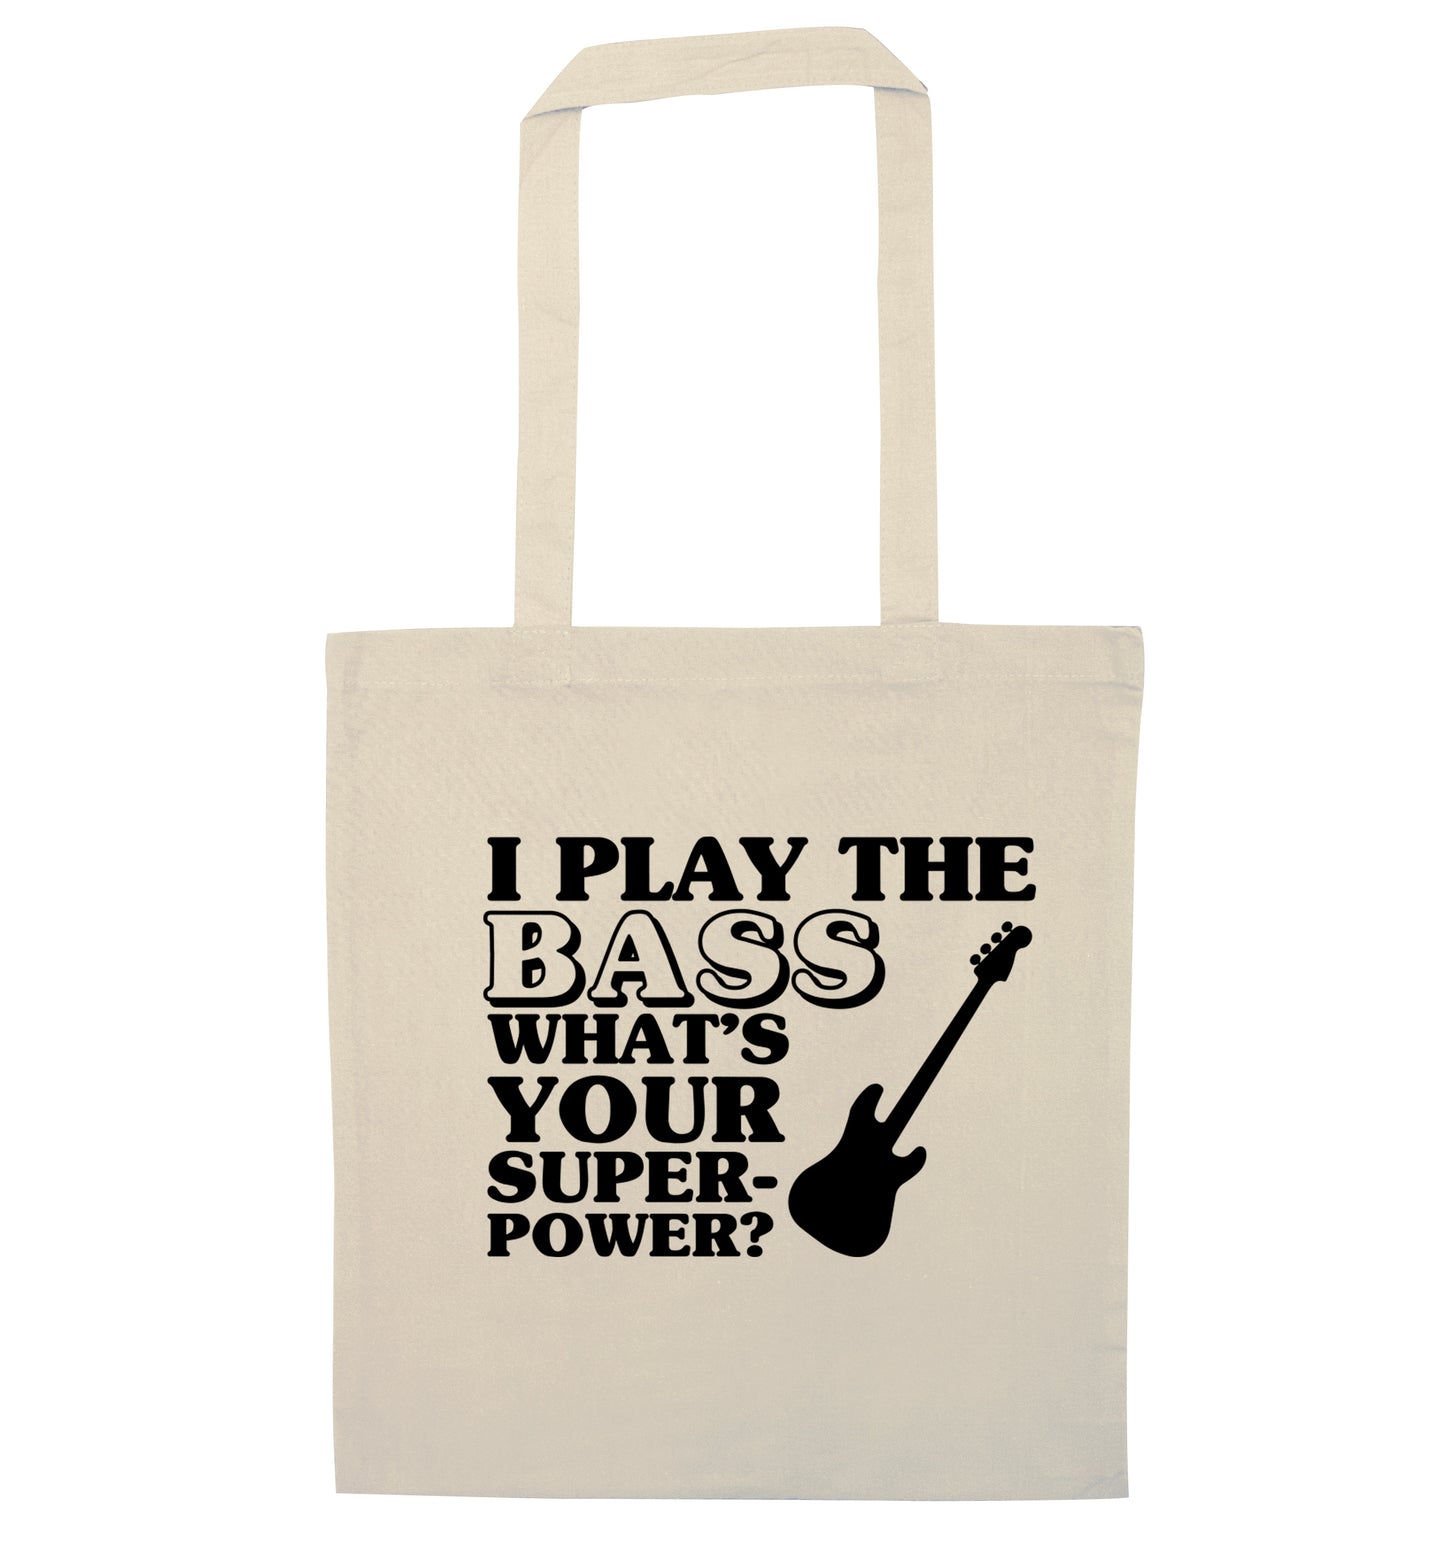 I play the bass what's your superpower? natural tote bag